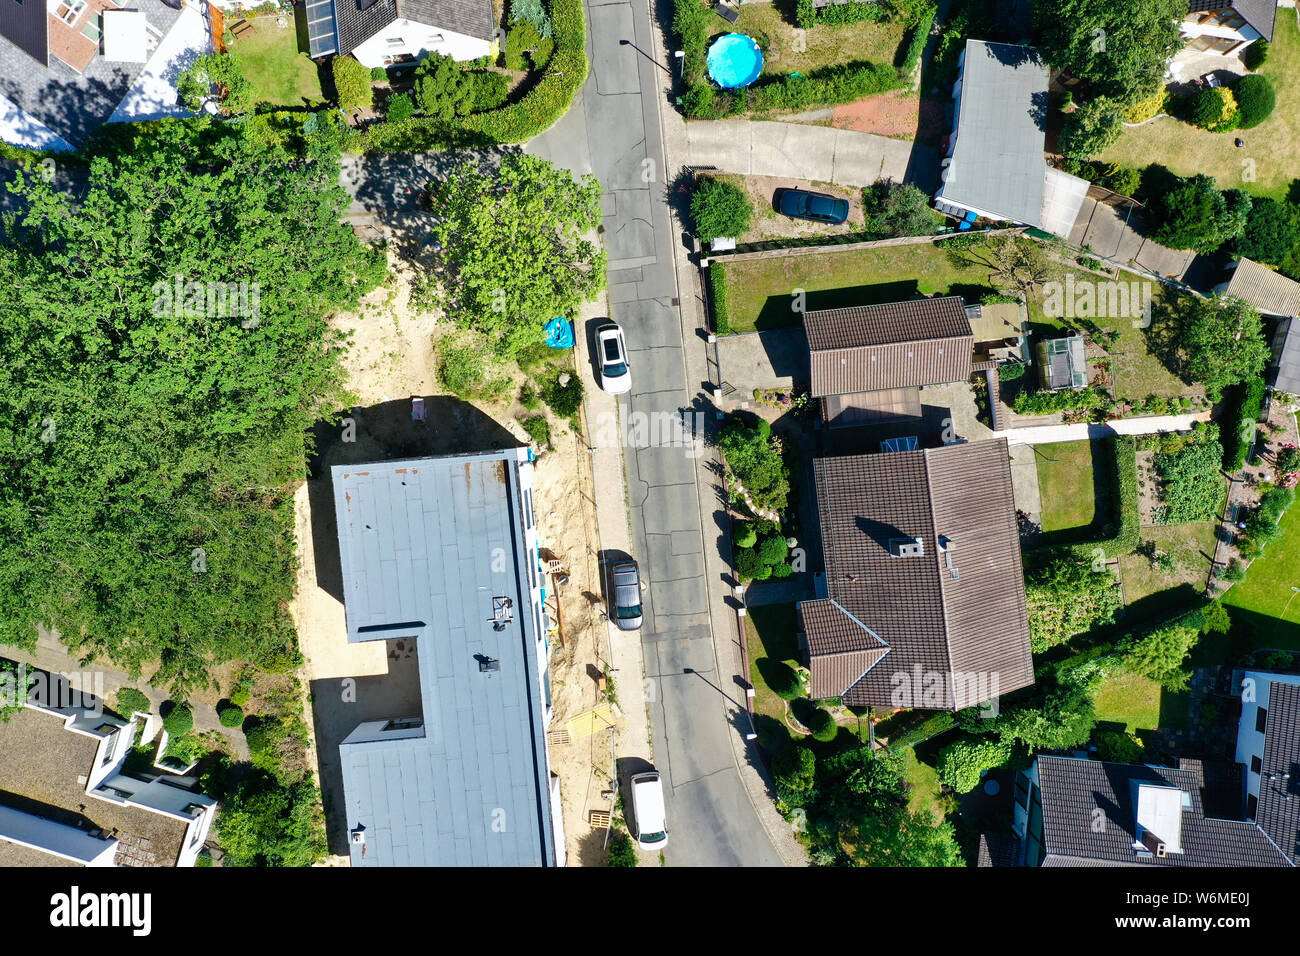 Celle, Germany, June 26.,2019: Housing estate with single-family houses, garden and lawn and neighbour, taken from a vertical perspective Stock Photo